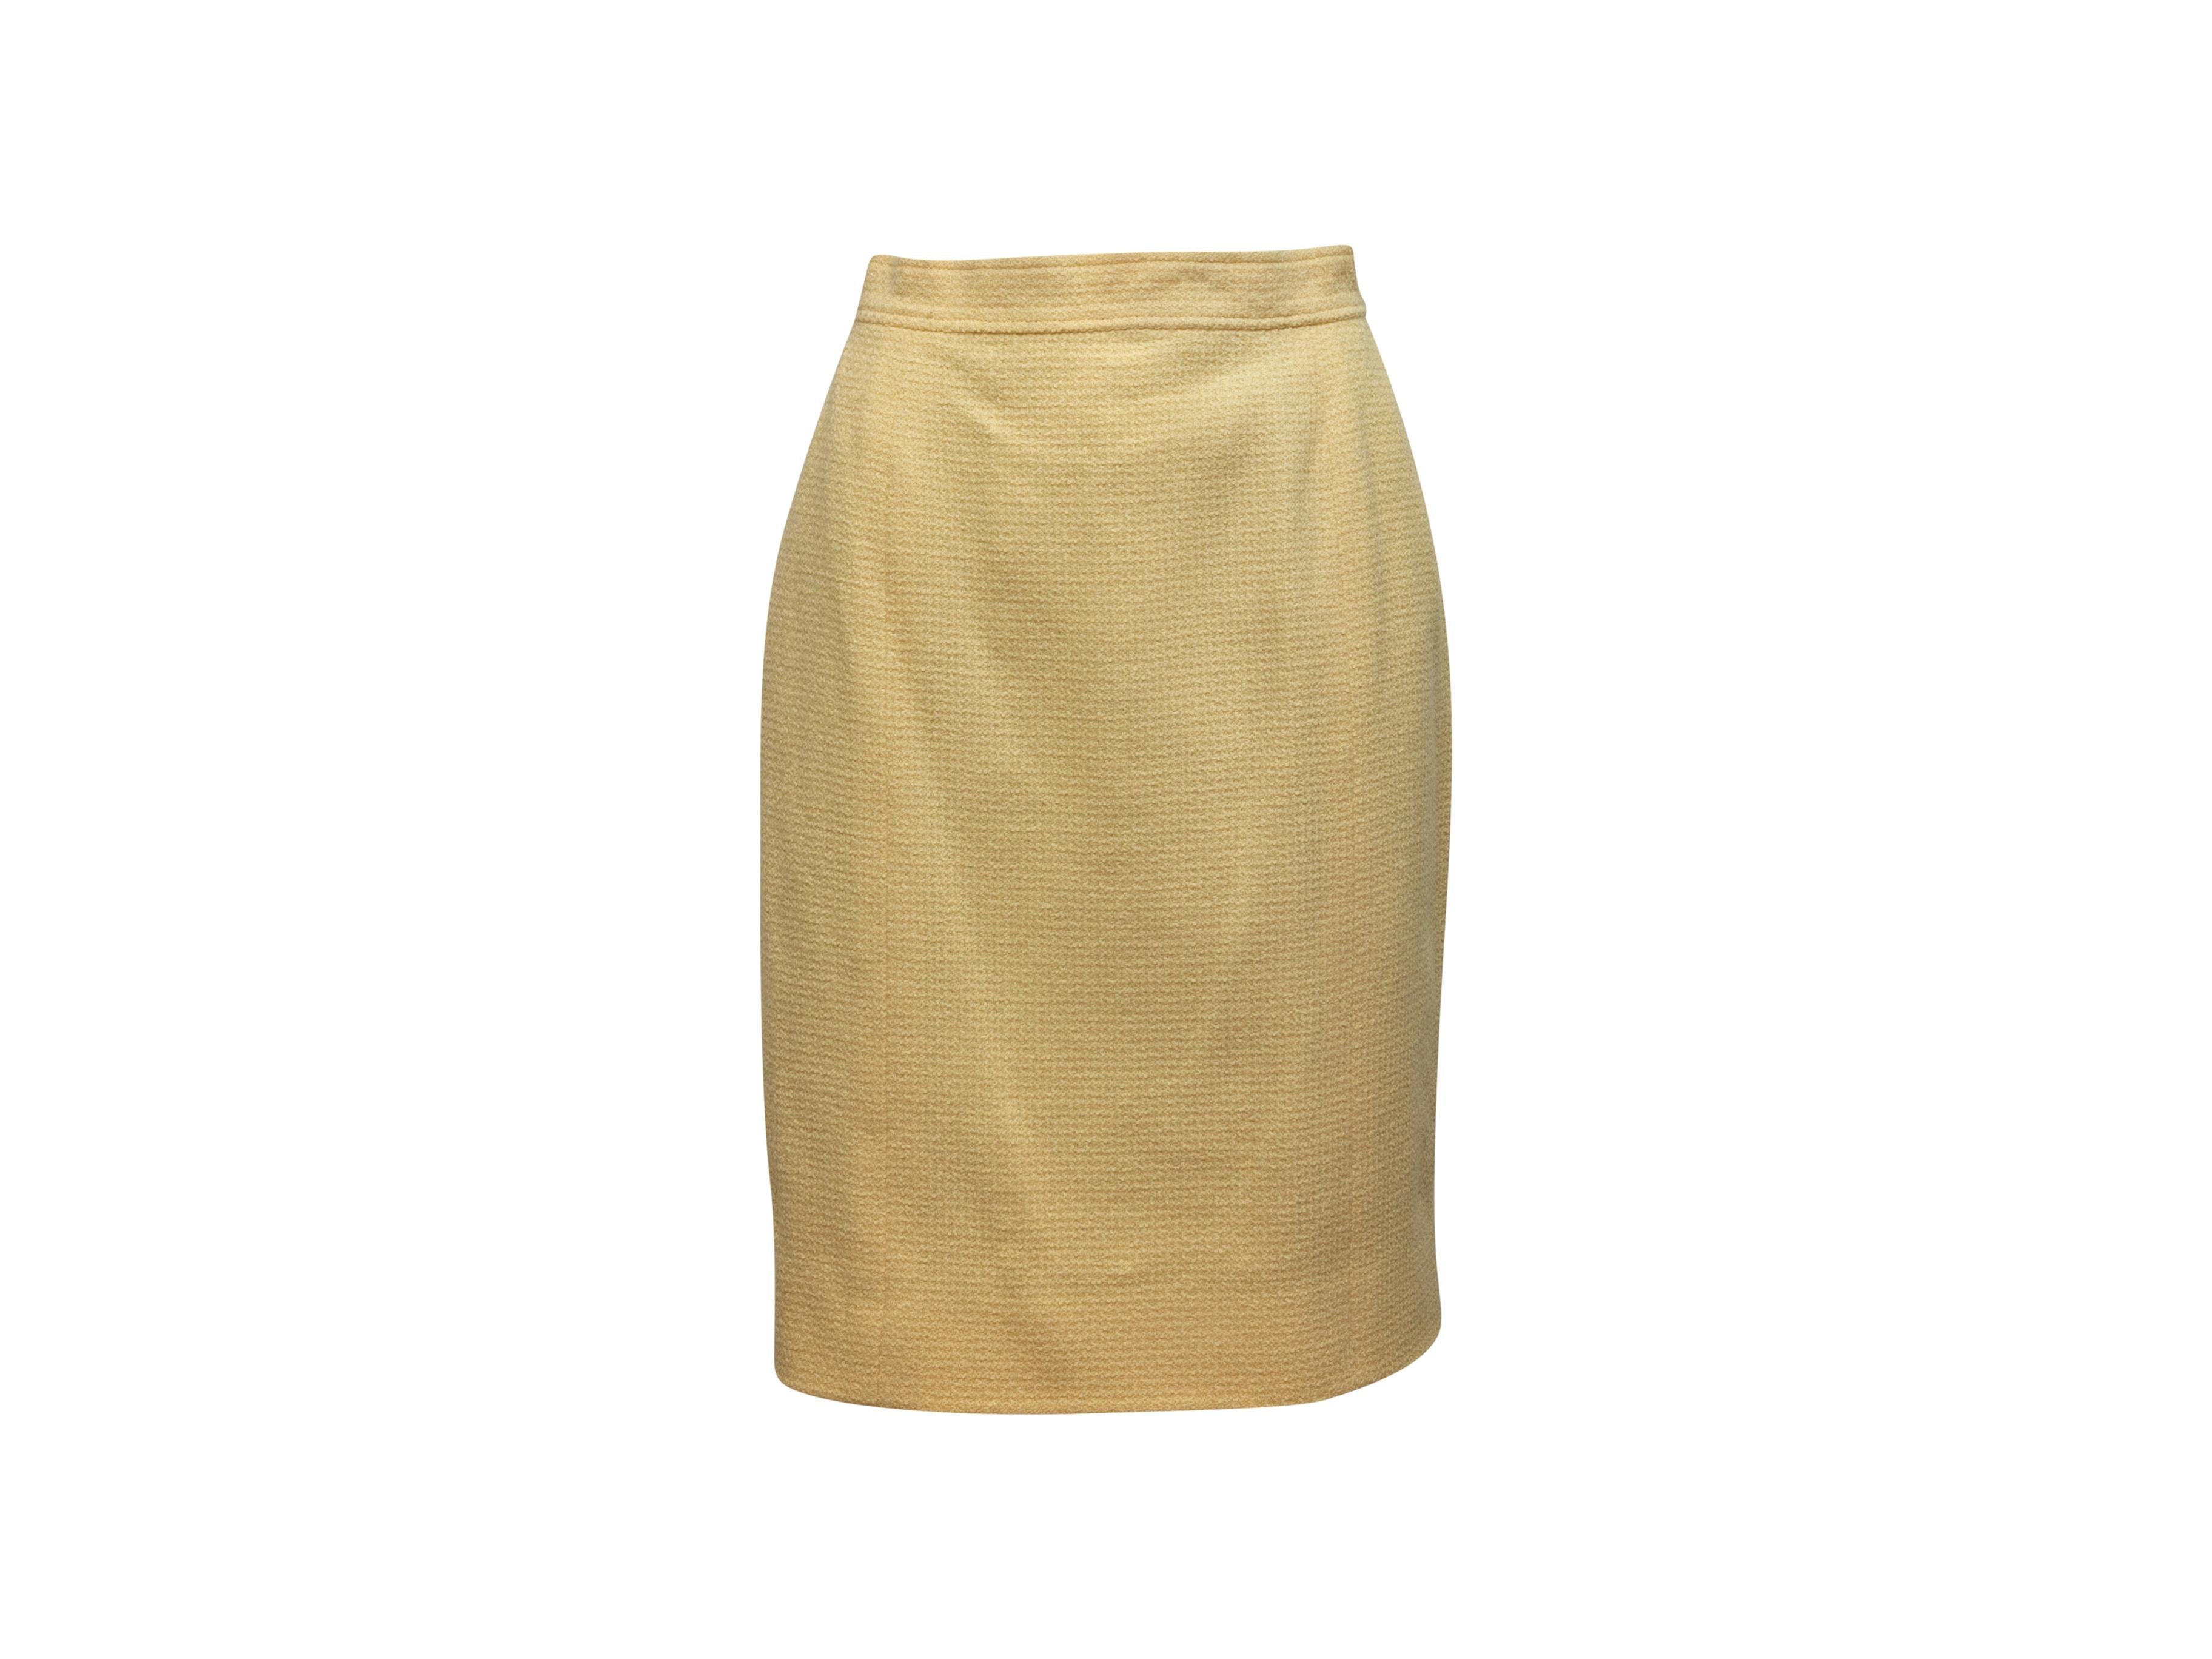 Product details: Vintage light yellow wool tweed skirt by Chanel Boutique. Zip closure at back. 28